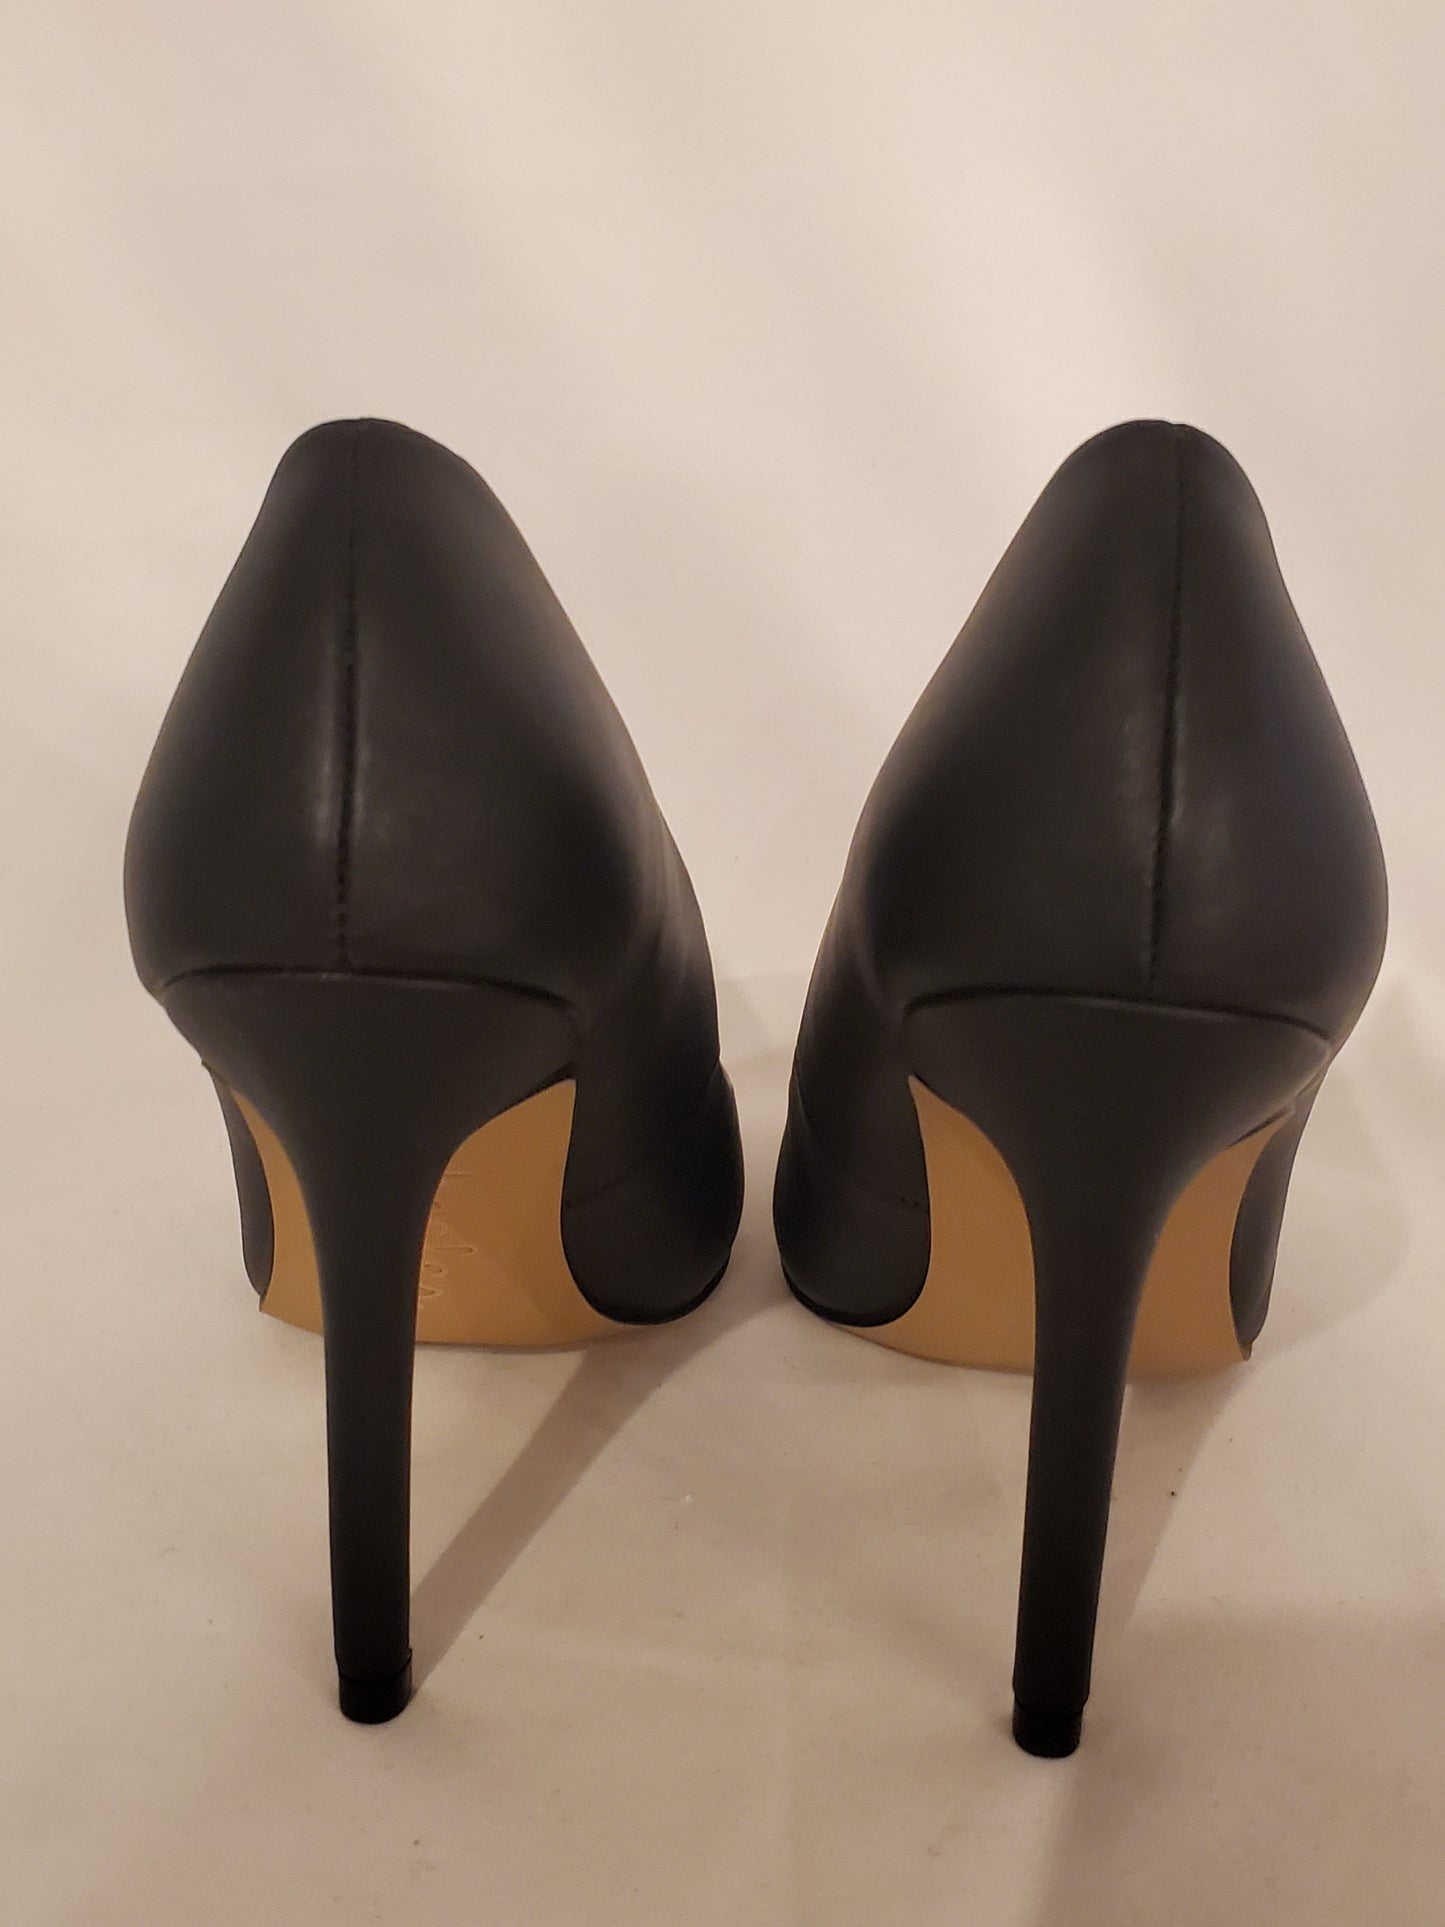 Shoes Heels Stiletto By Charles By Charles David  Size: 7